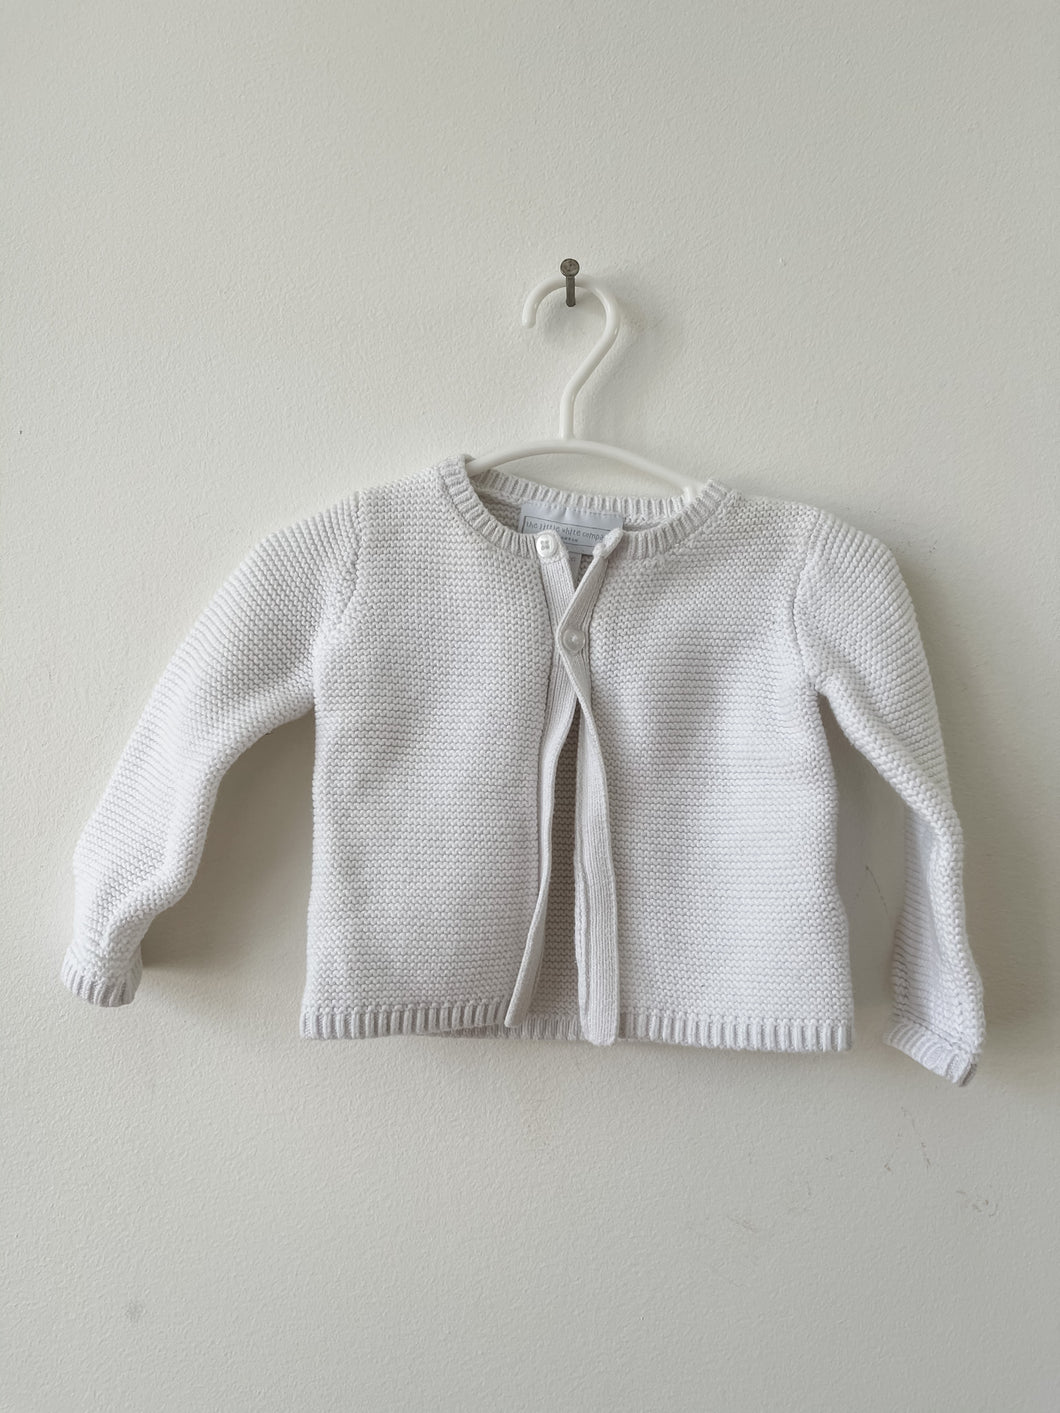 Cream Little White Company Cardigan Size 0-3 Months